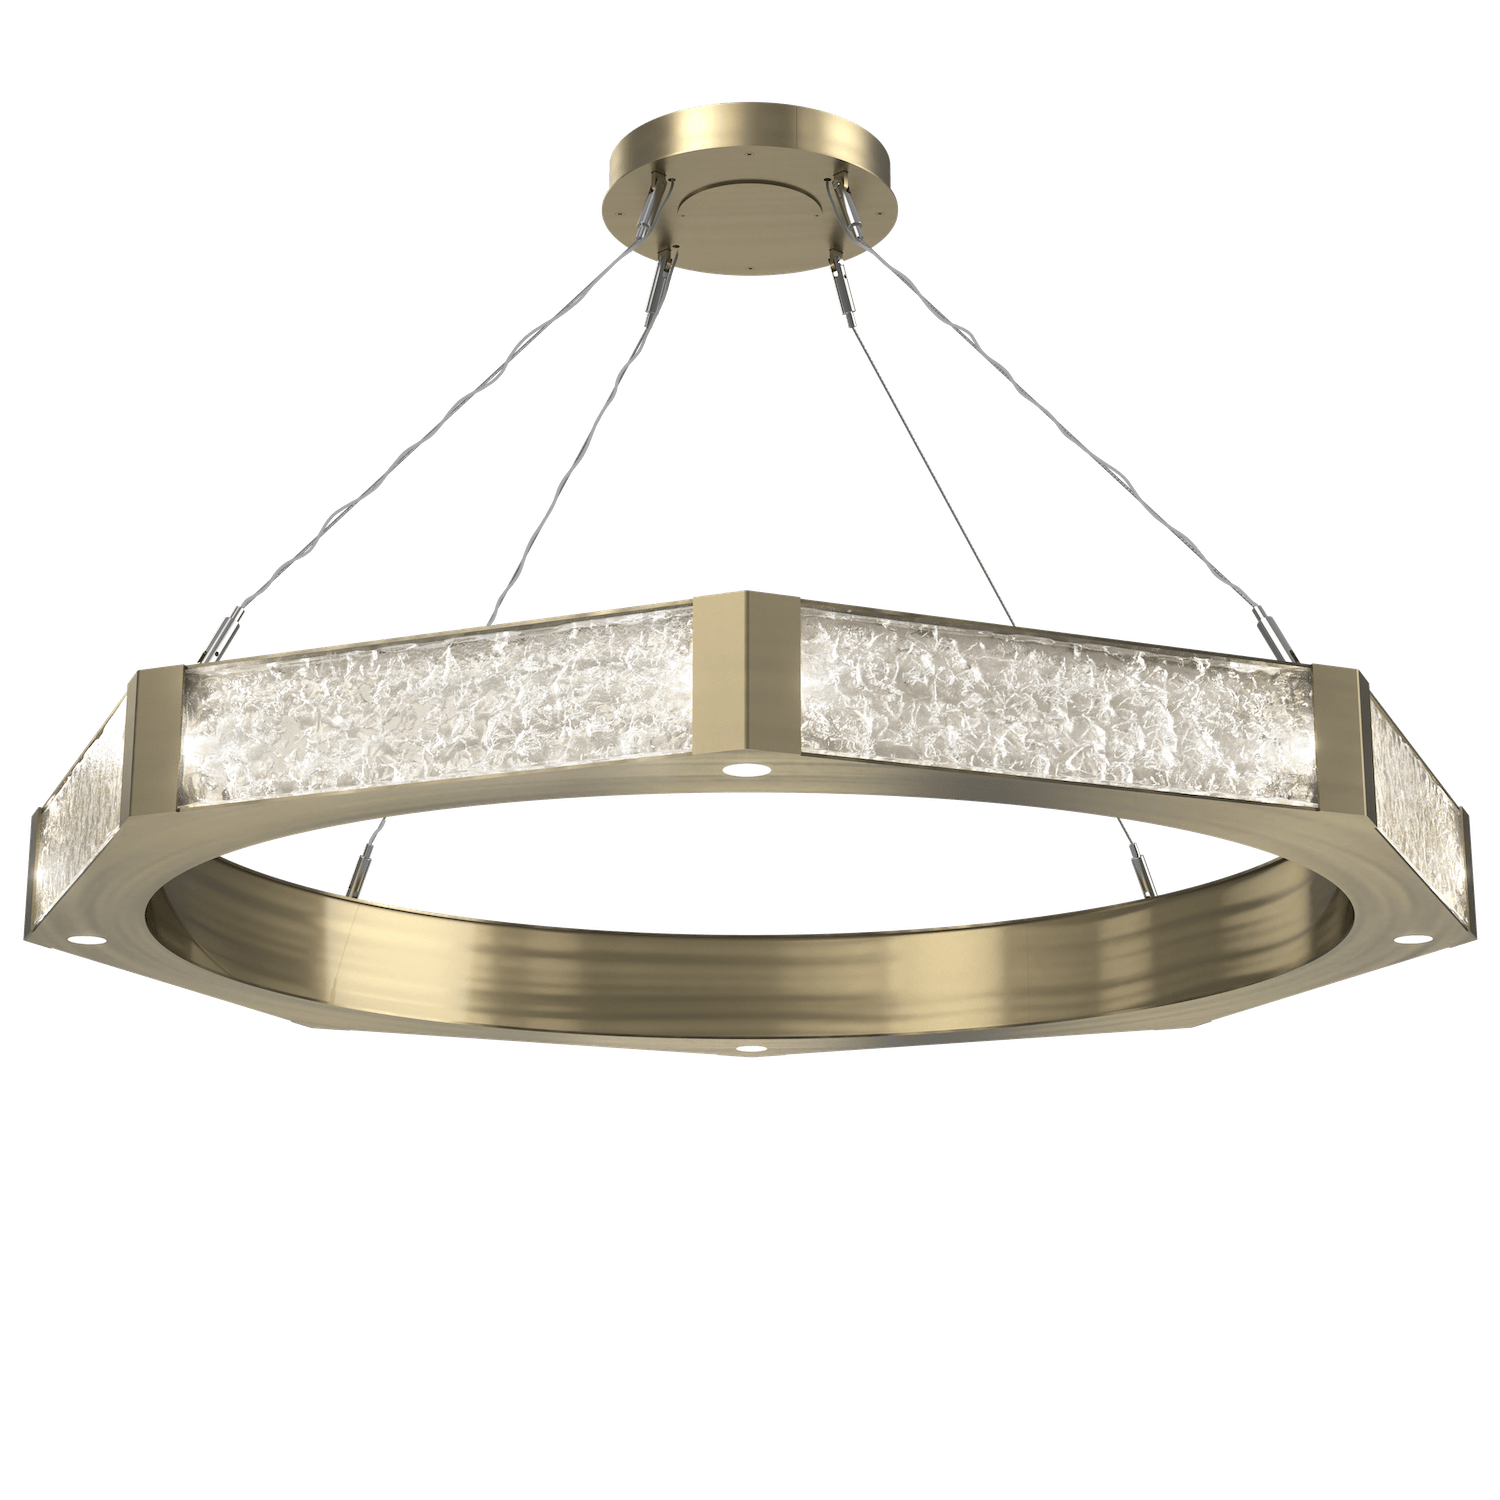 CHB0061-48-HB-GC-Hammerton-Studio-Glacier-48-inch-ring-chandelier-with-heritage-brass-finish-and-clear-blown-glass-with-geo-clear-cast-glass-diffusers-and-LED-lamping